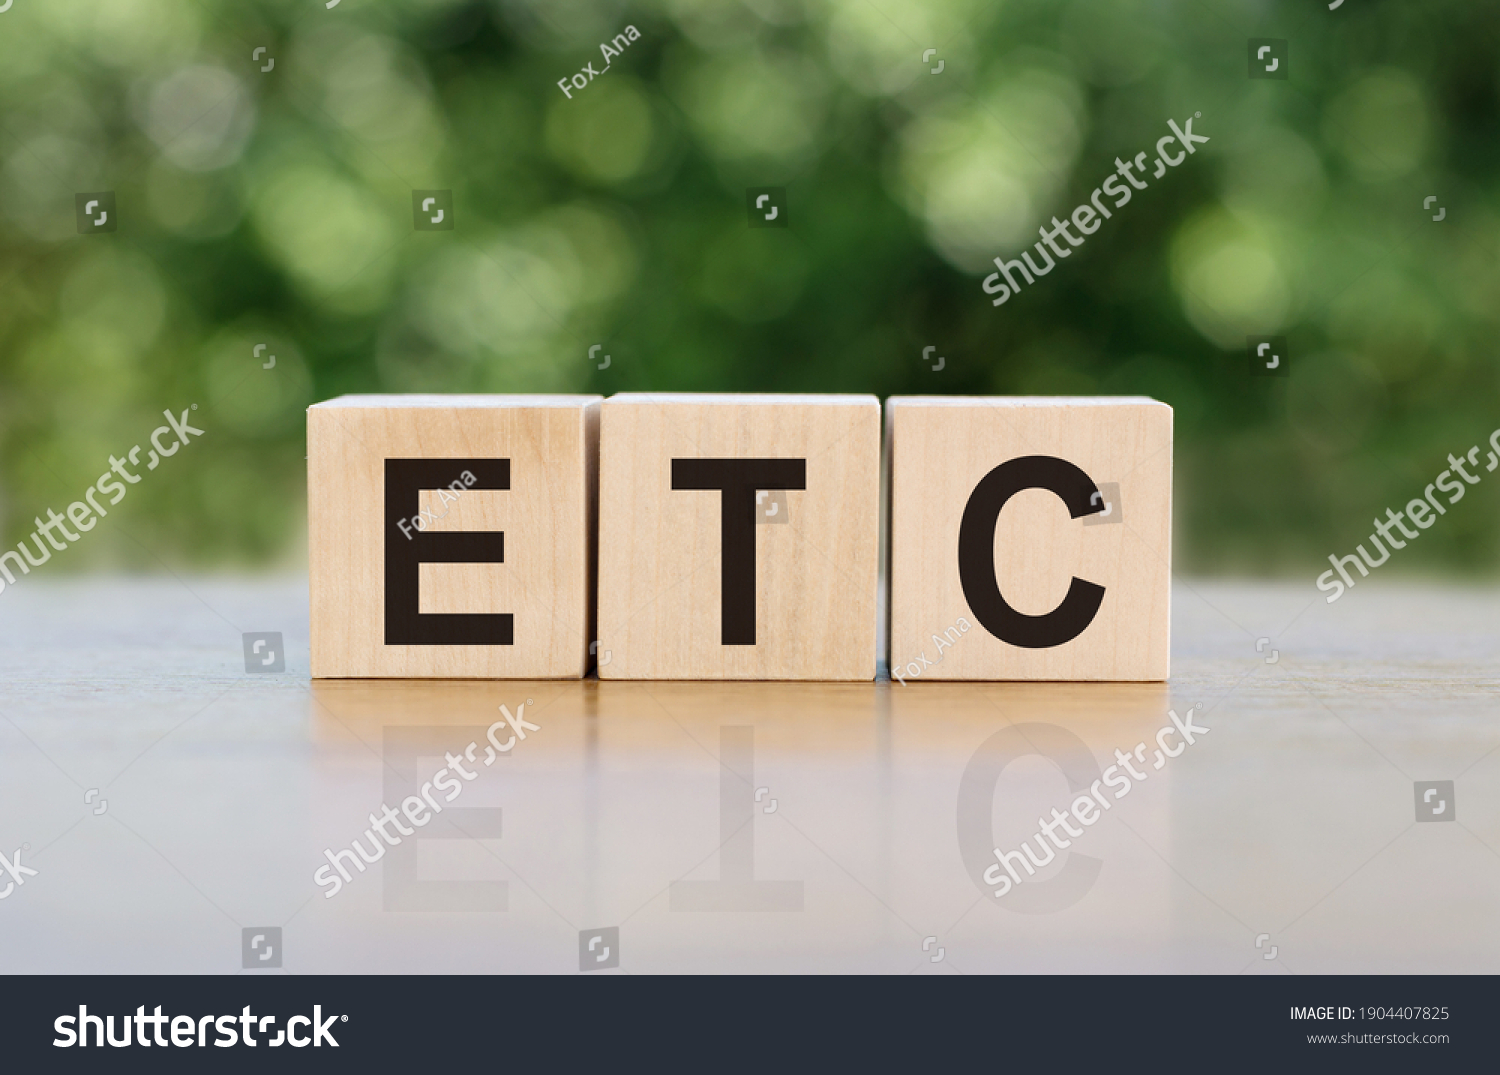 ETC (abbreviation of et cetera) word written on wooden blocks. The text is written in black letters and is reflected in the mirror surface of the table. #1904407825